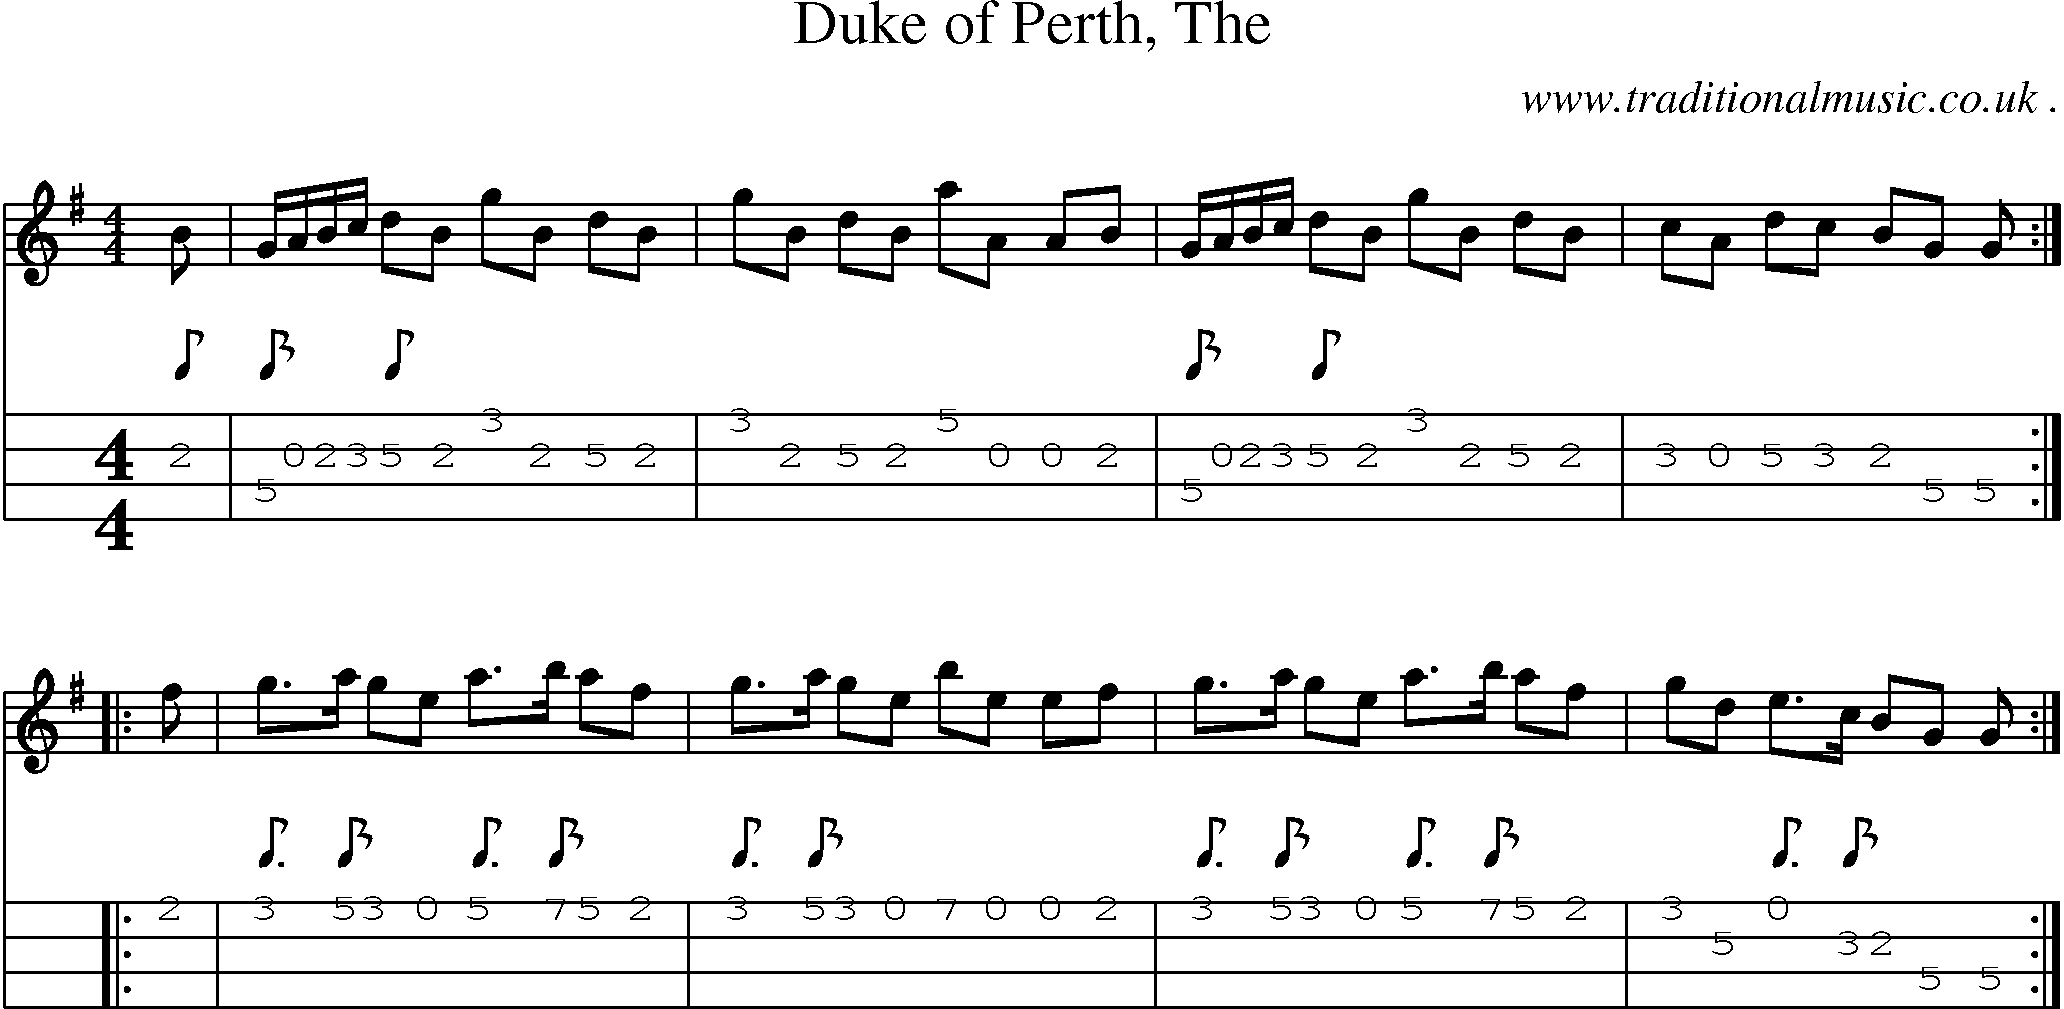 Sheet-music  score, Chords and Mandolin Tabs for Duke Of Perth The